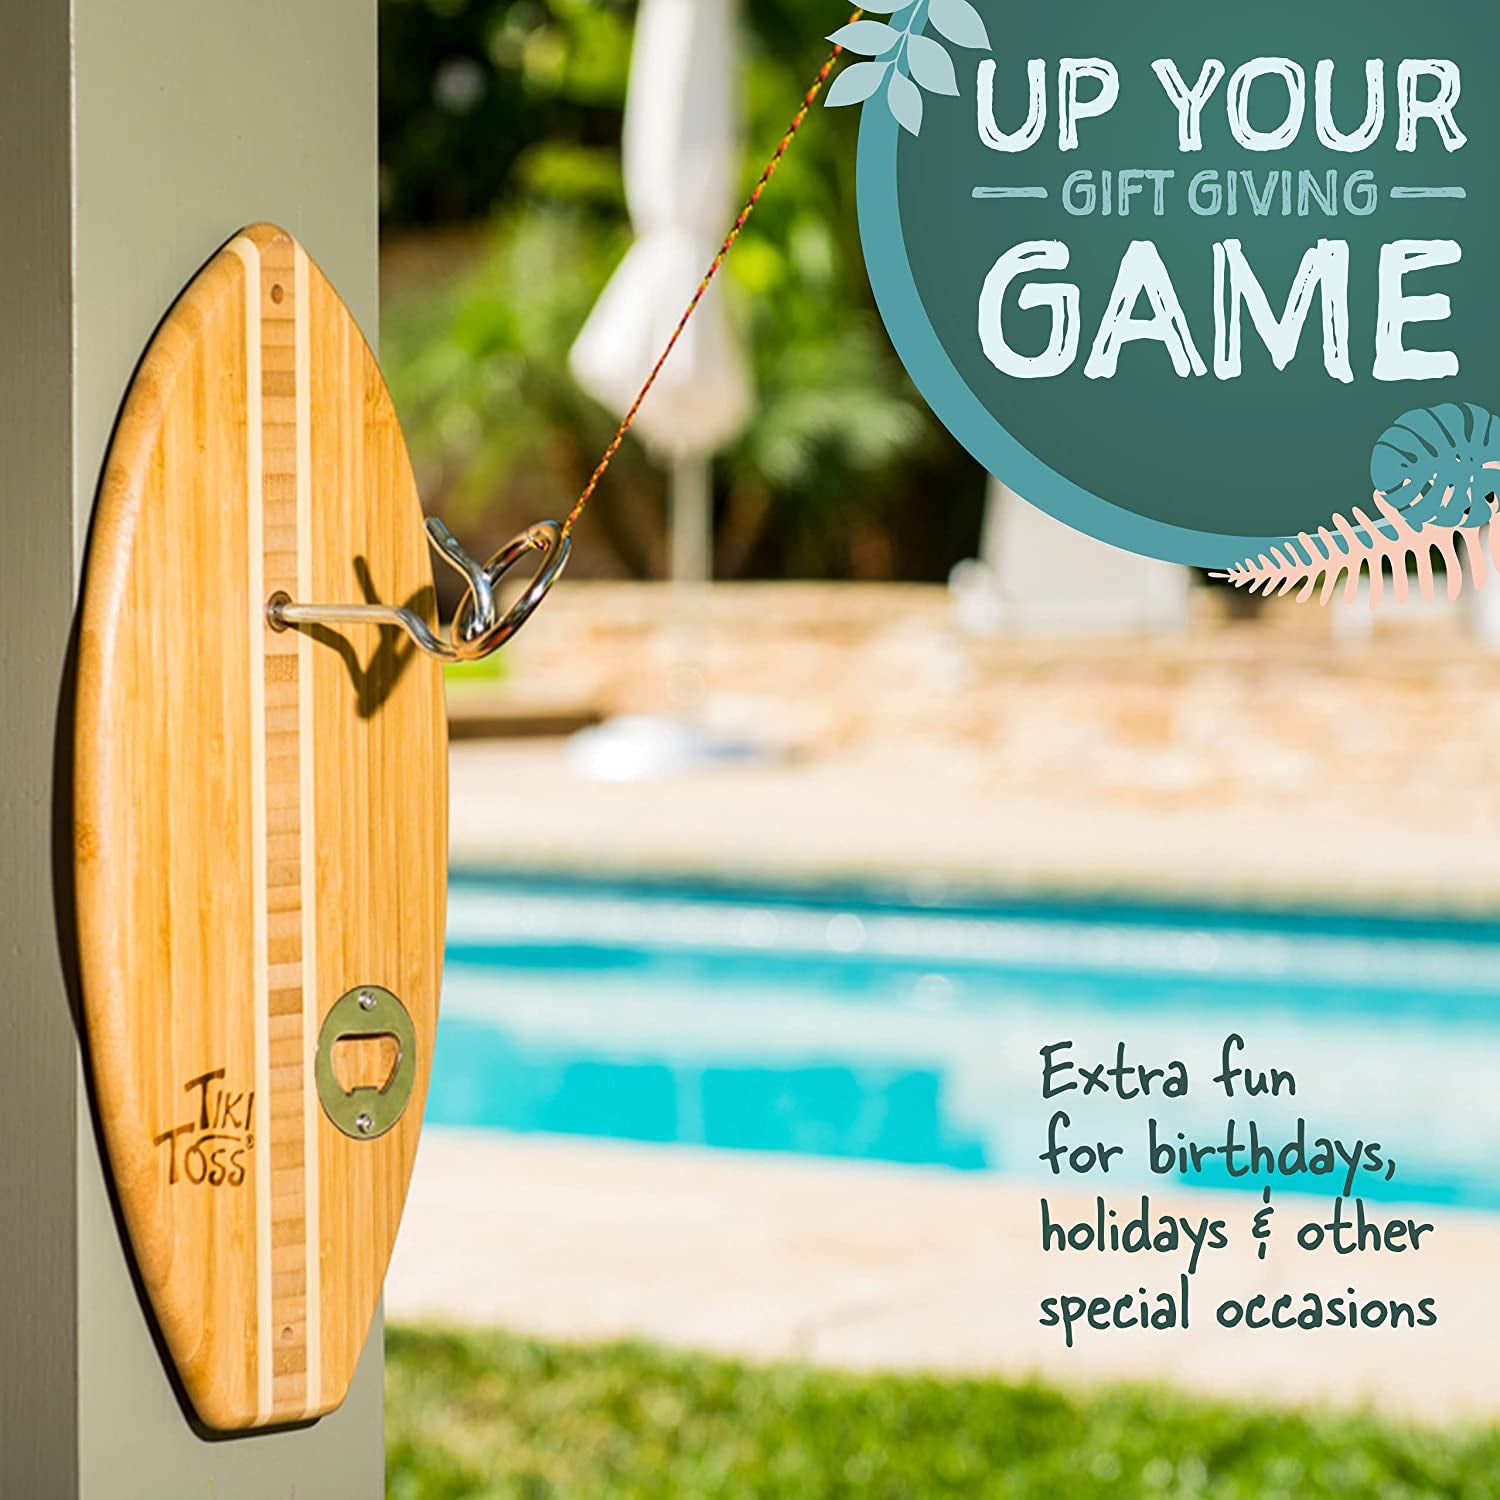 Ring Toss Game for Adults - 13 Inch Surfboard Edition - Hook and Ring Game for Outdoor & Indoor Use, Gifts for Dad, Husband & College Students